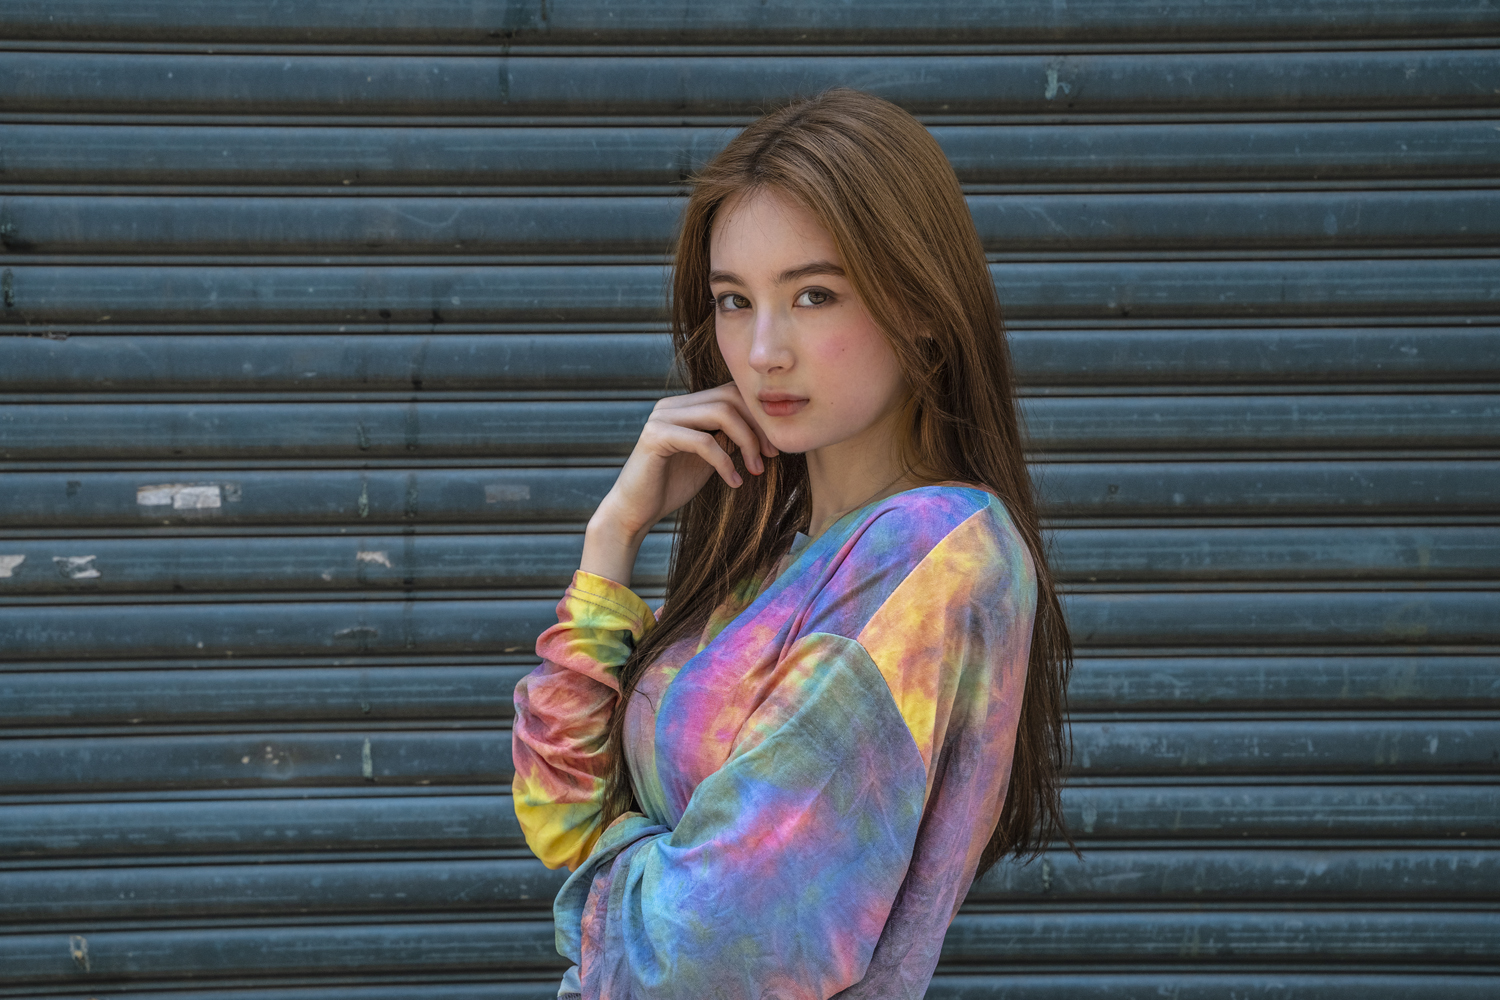 Russian K Pop Trainee Lana To Debut At The End Of June With Release Of Single Music Video K Popped